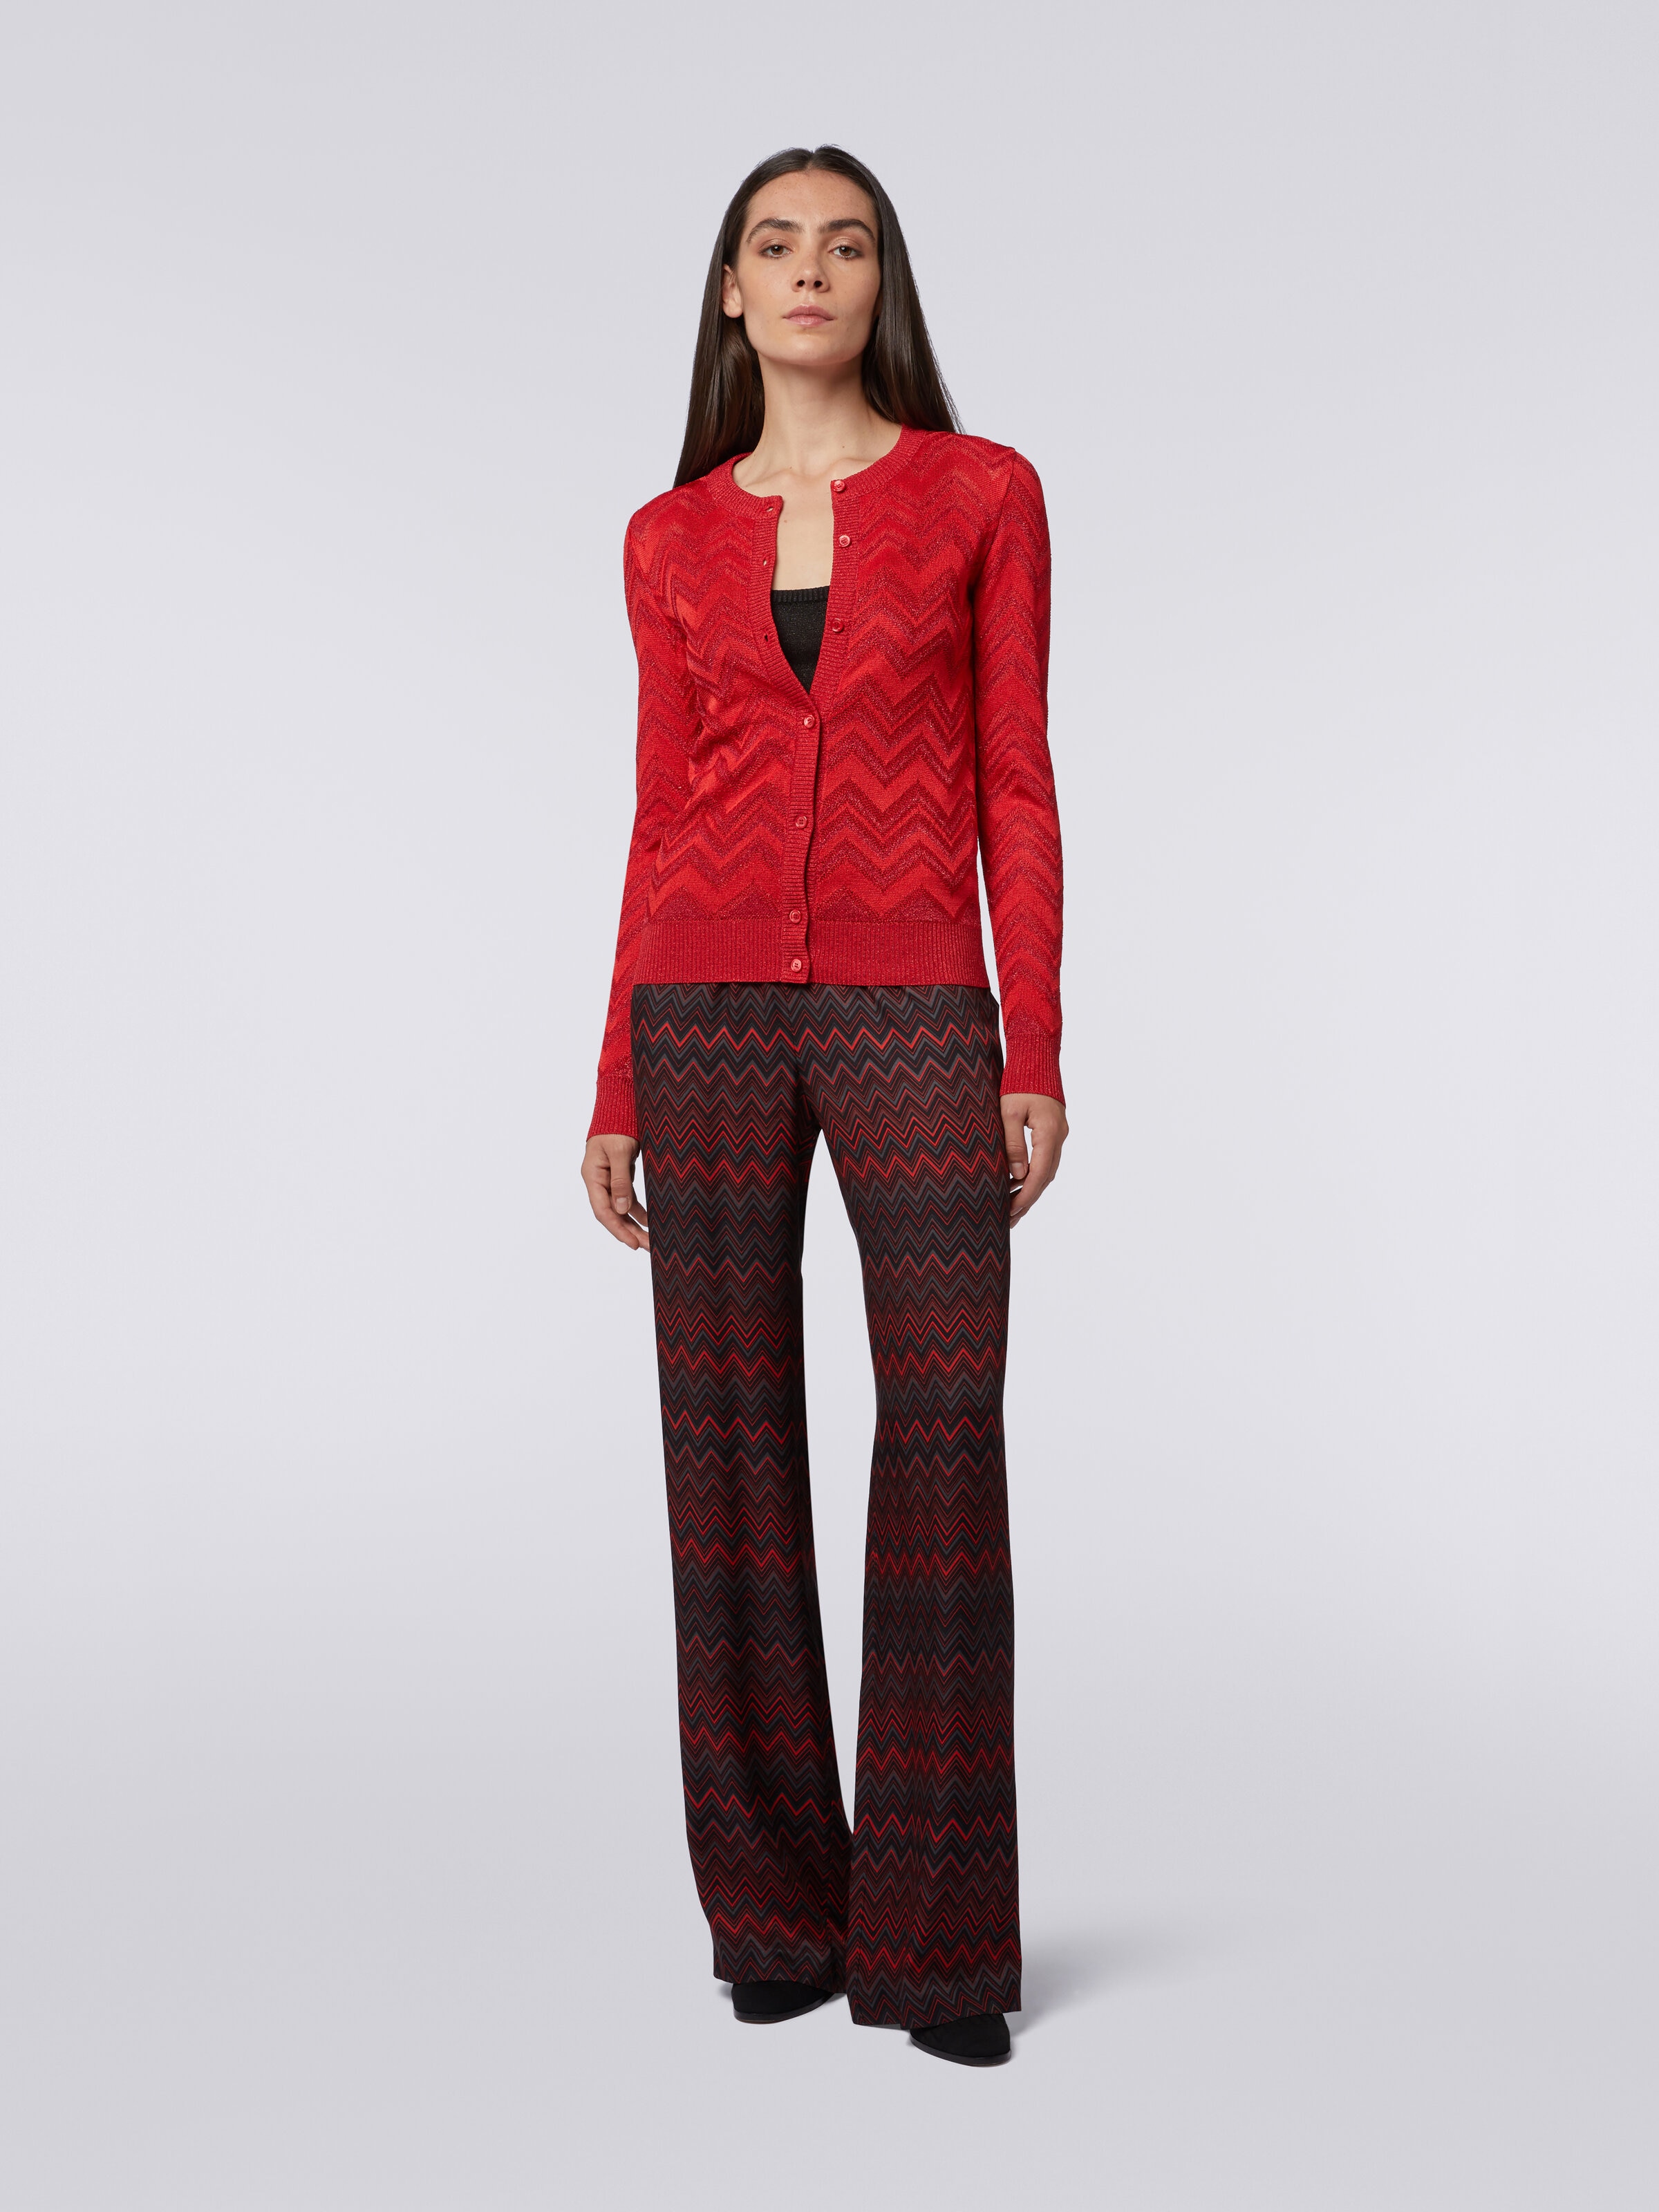 Cardigan in tonal zigzag knit with lurex, Red  - 1